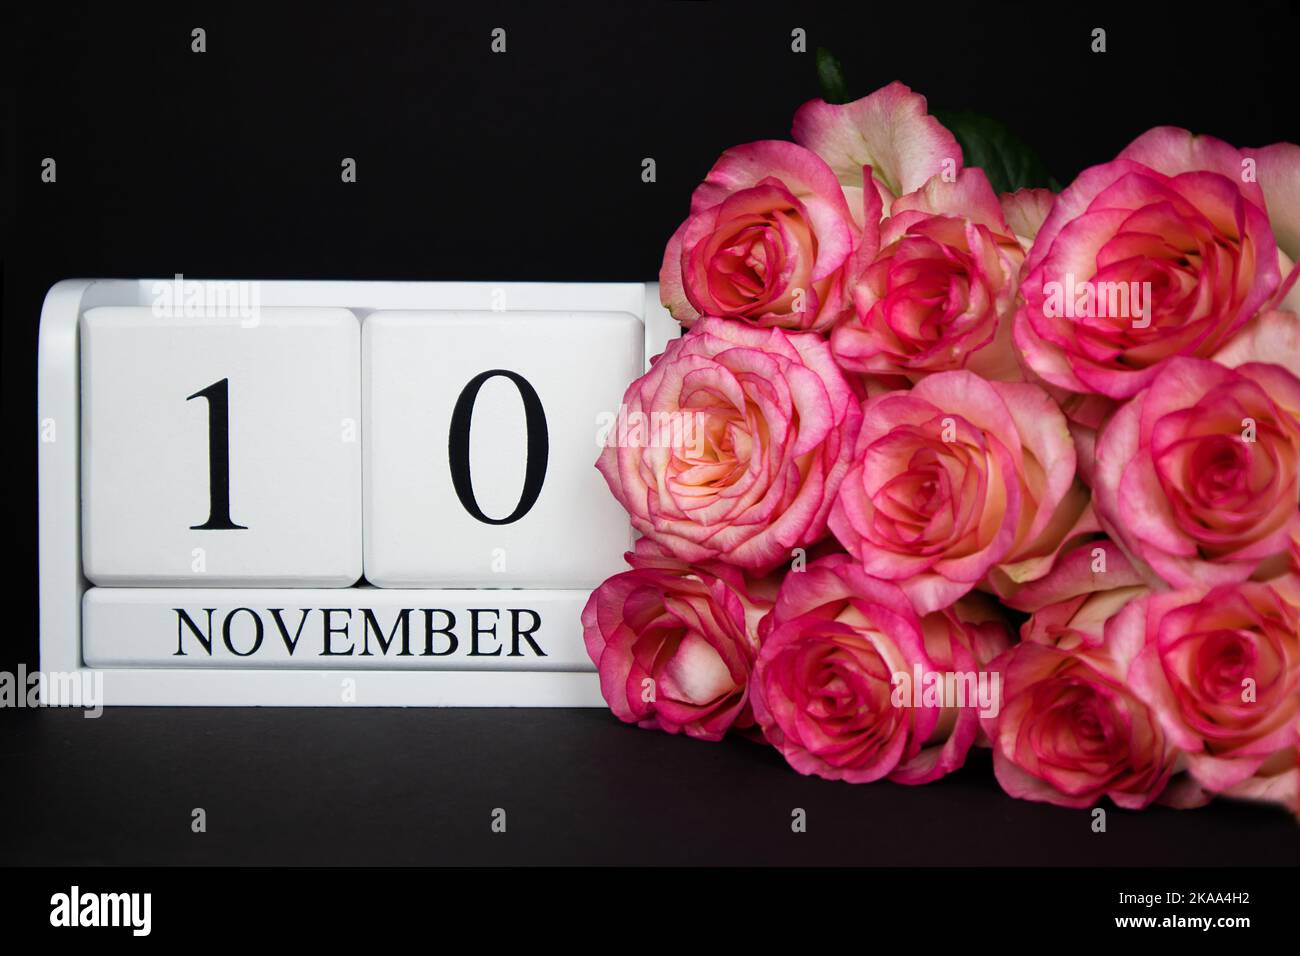 November 10 wooden calendar, white on a black background, pink roses lie nearby. Stock Photo